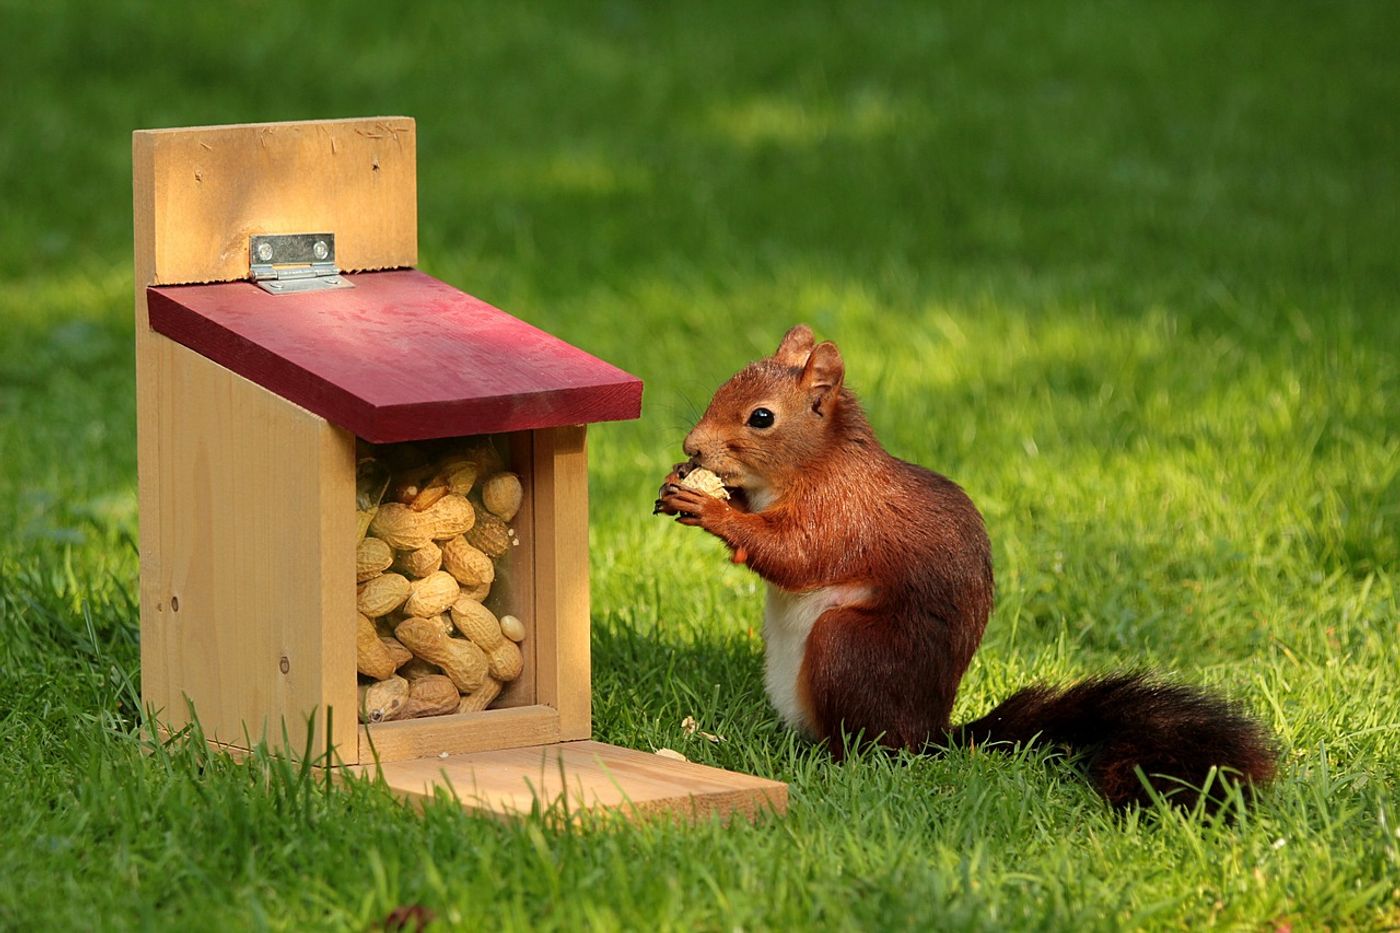 Squirrels use advanced cognitive techniques to organize the different kinds of nuts they find and hide.